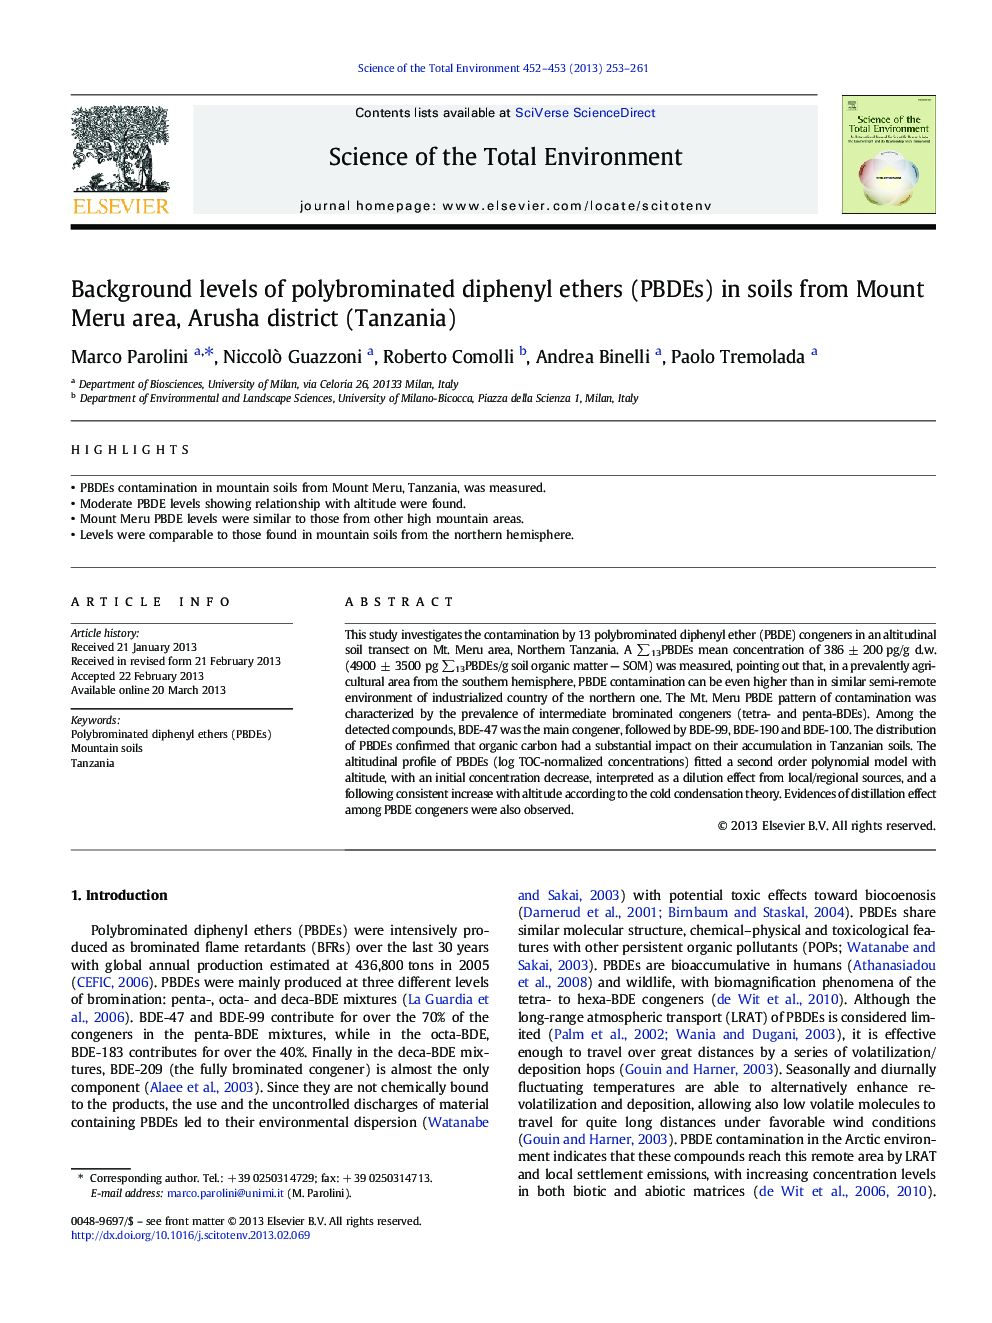 Background levels of polybrominated diphenyl ethers (PBDEs) in soils from Mount Meru area, Arusha district (Tanzania)